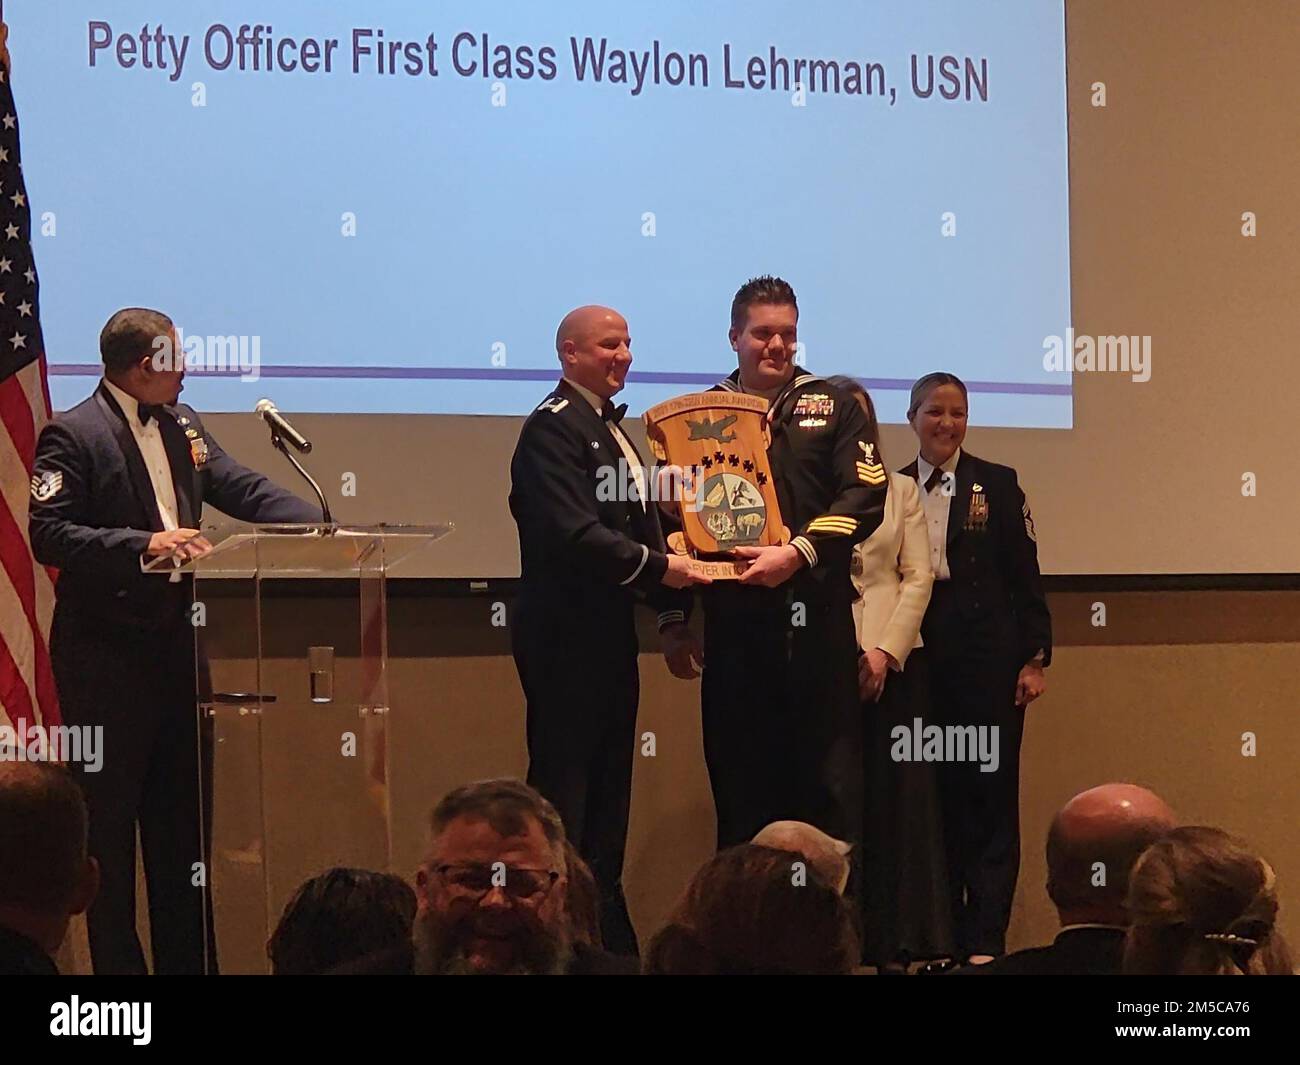 Cryptologic Technician Collection 1st Class Waylon Lehrman was nominated for and won the category of Goodfellow Volunteer of the Year at the annual Goodfellow Air Force Base awards ceremony hosted by the U.S. Air Force 17th Training Wing. Stock Photo